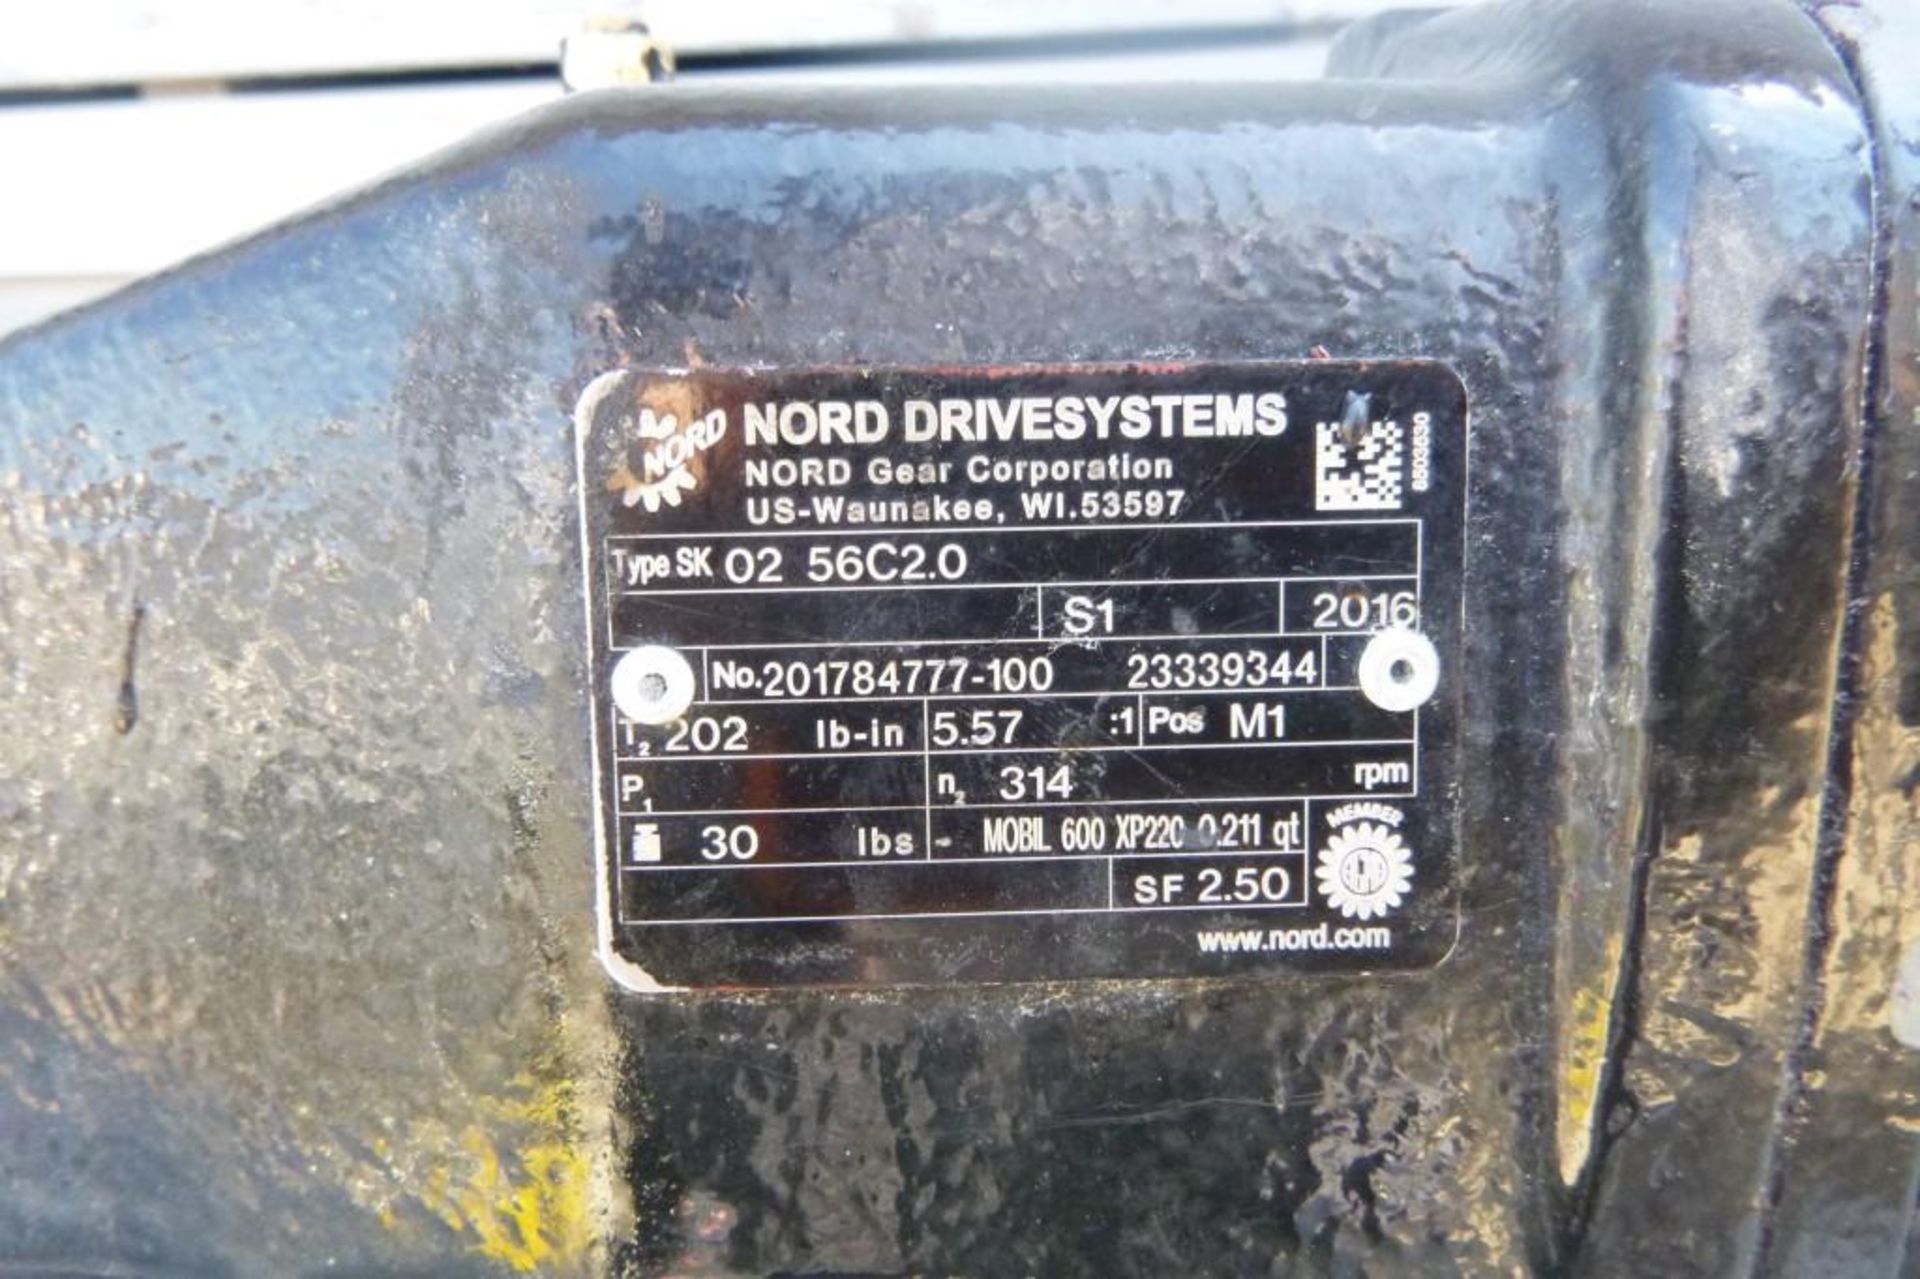 Reducer, Gear Box, 1 HP, 5.57:1, Nord Drive Systems #C744072 (Loading Cost = $30) - Image 4 of 4